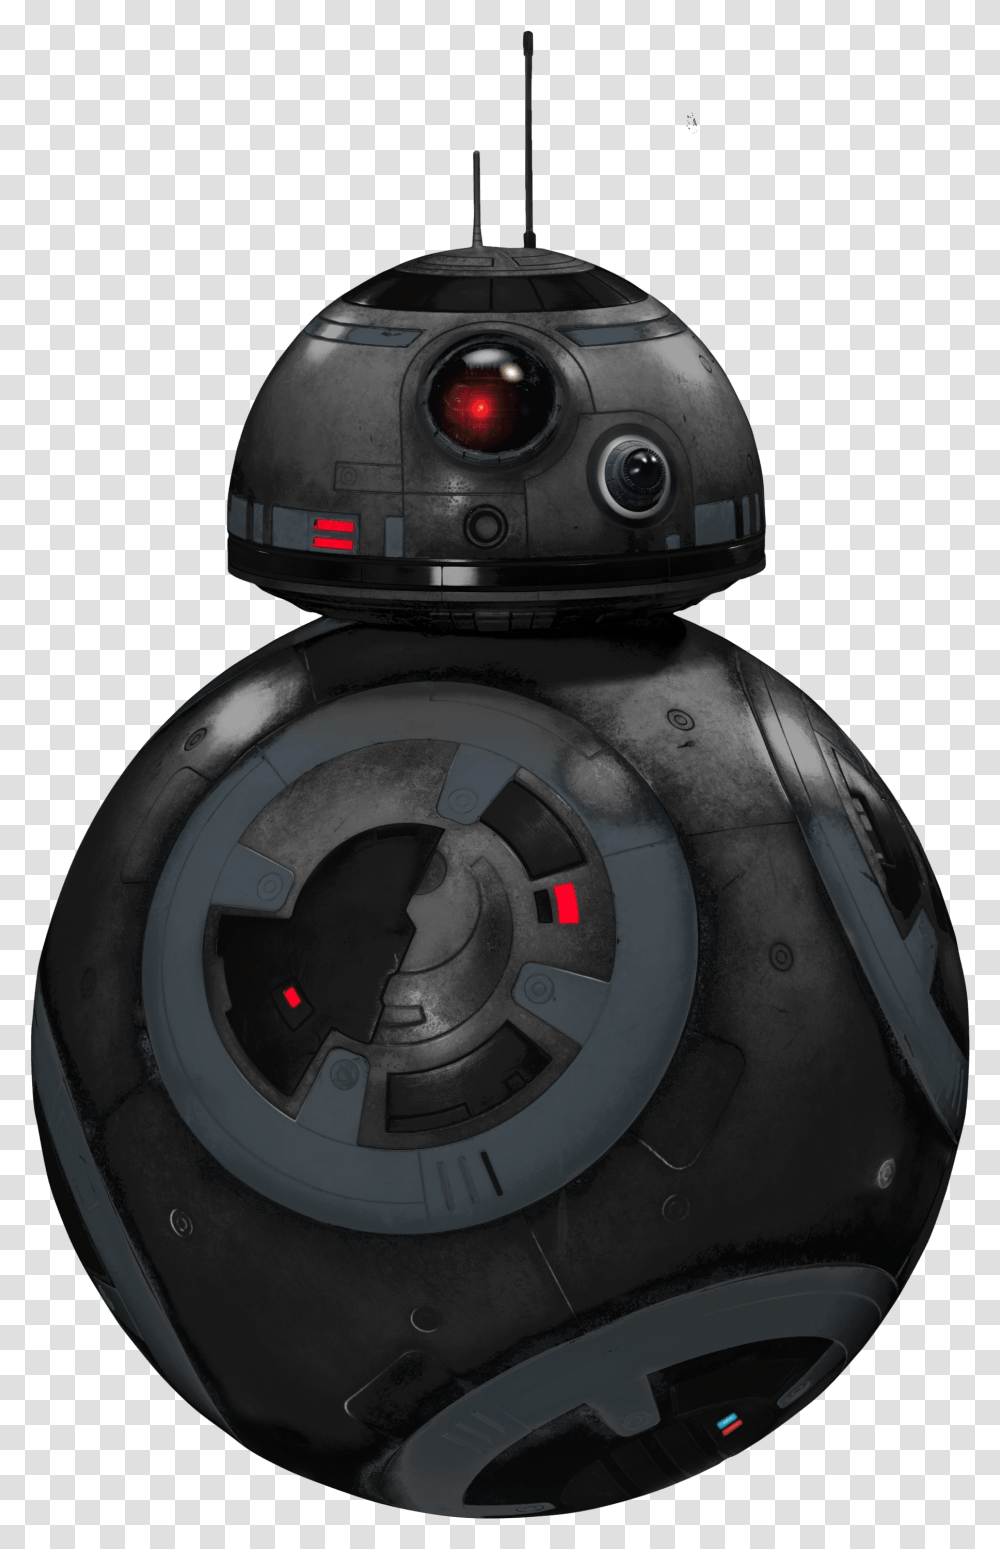 Download Bb 9e Droid Star Wars Ep8 The Last Jedi First Order Star Wars 8 Droids, Helmet, Clothing, Apparel, Electronics Transparent Png